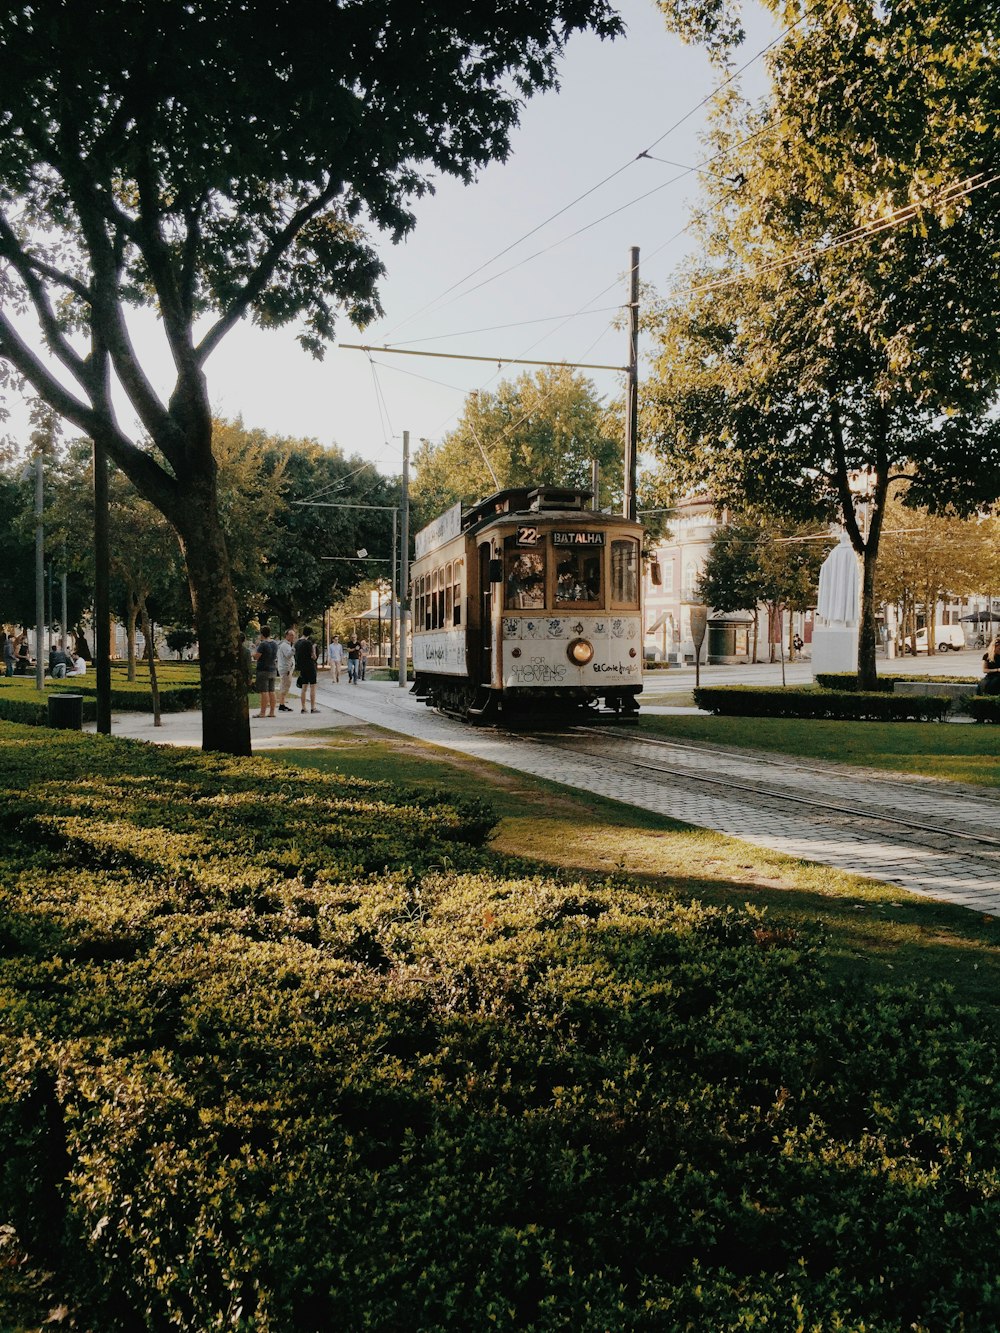 brown and white tram